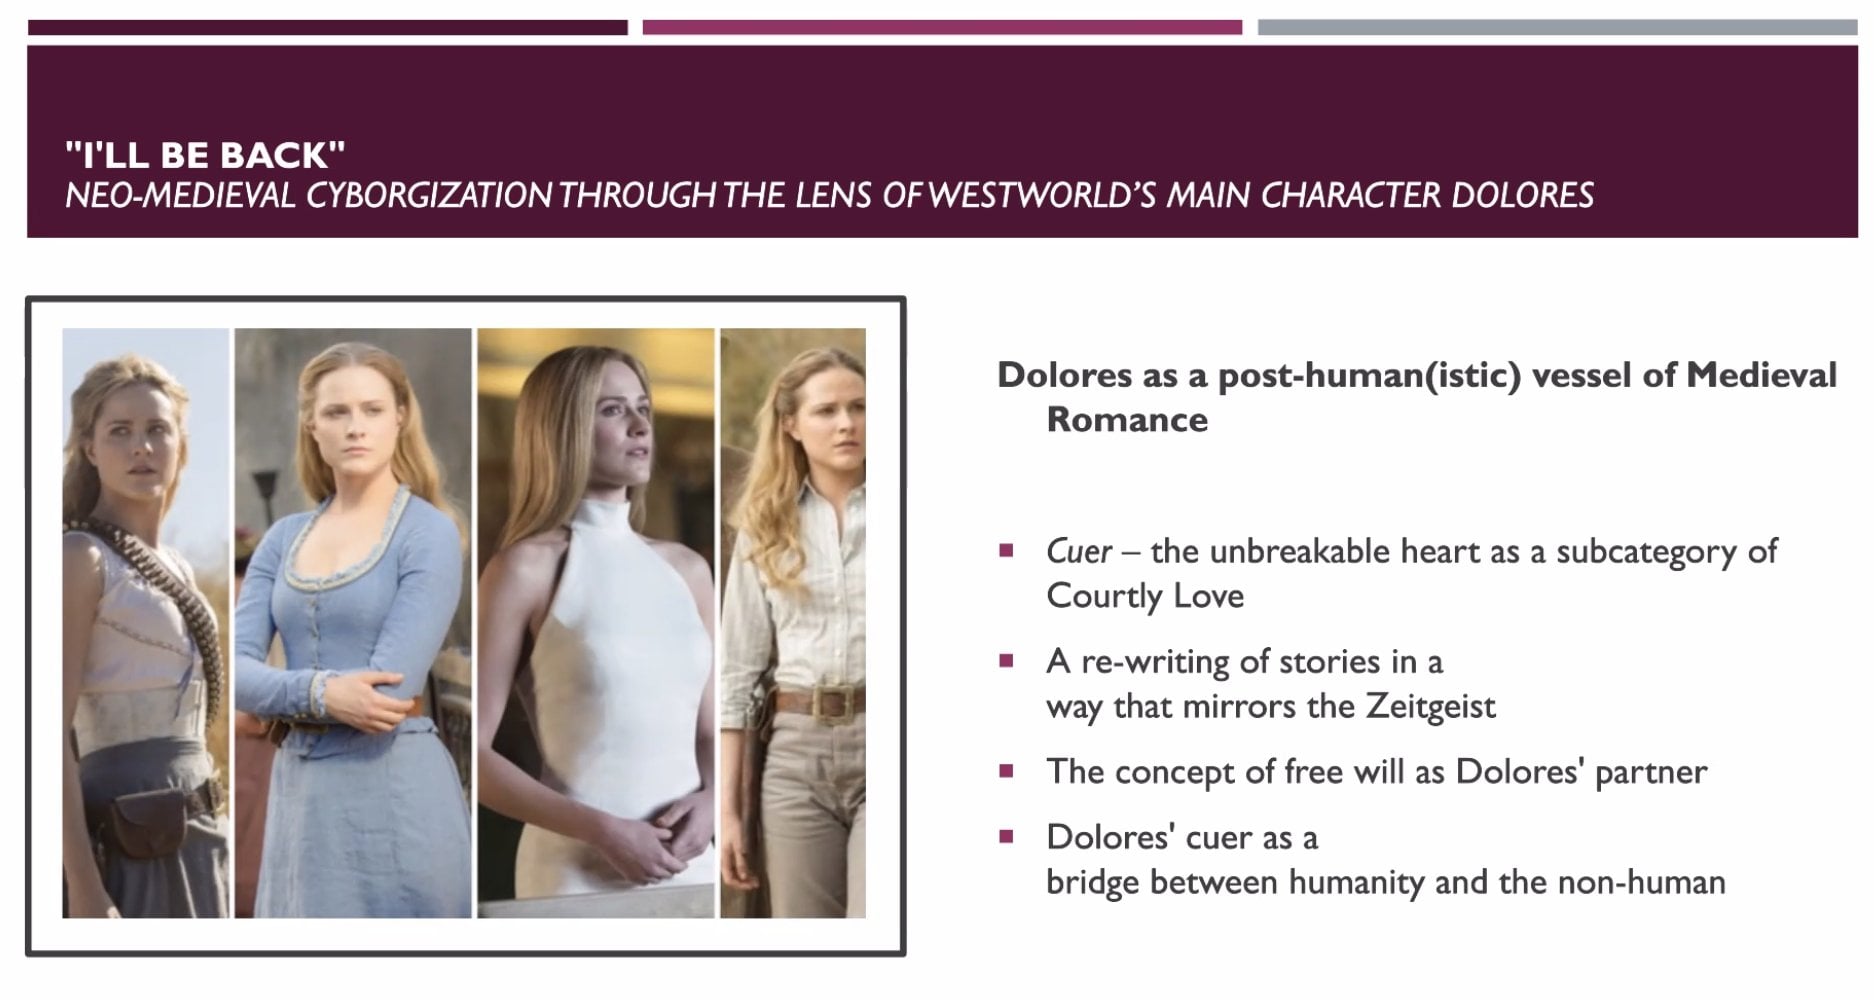 “I’ll be back”—Neo-medieval cyborgization through the lens of Westworld’s main character Dolores